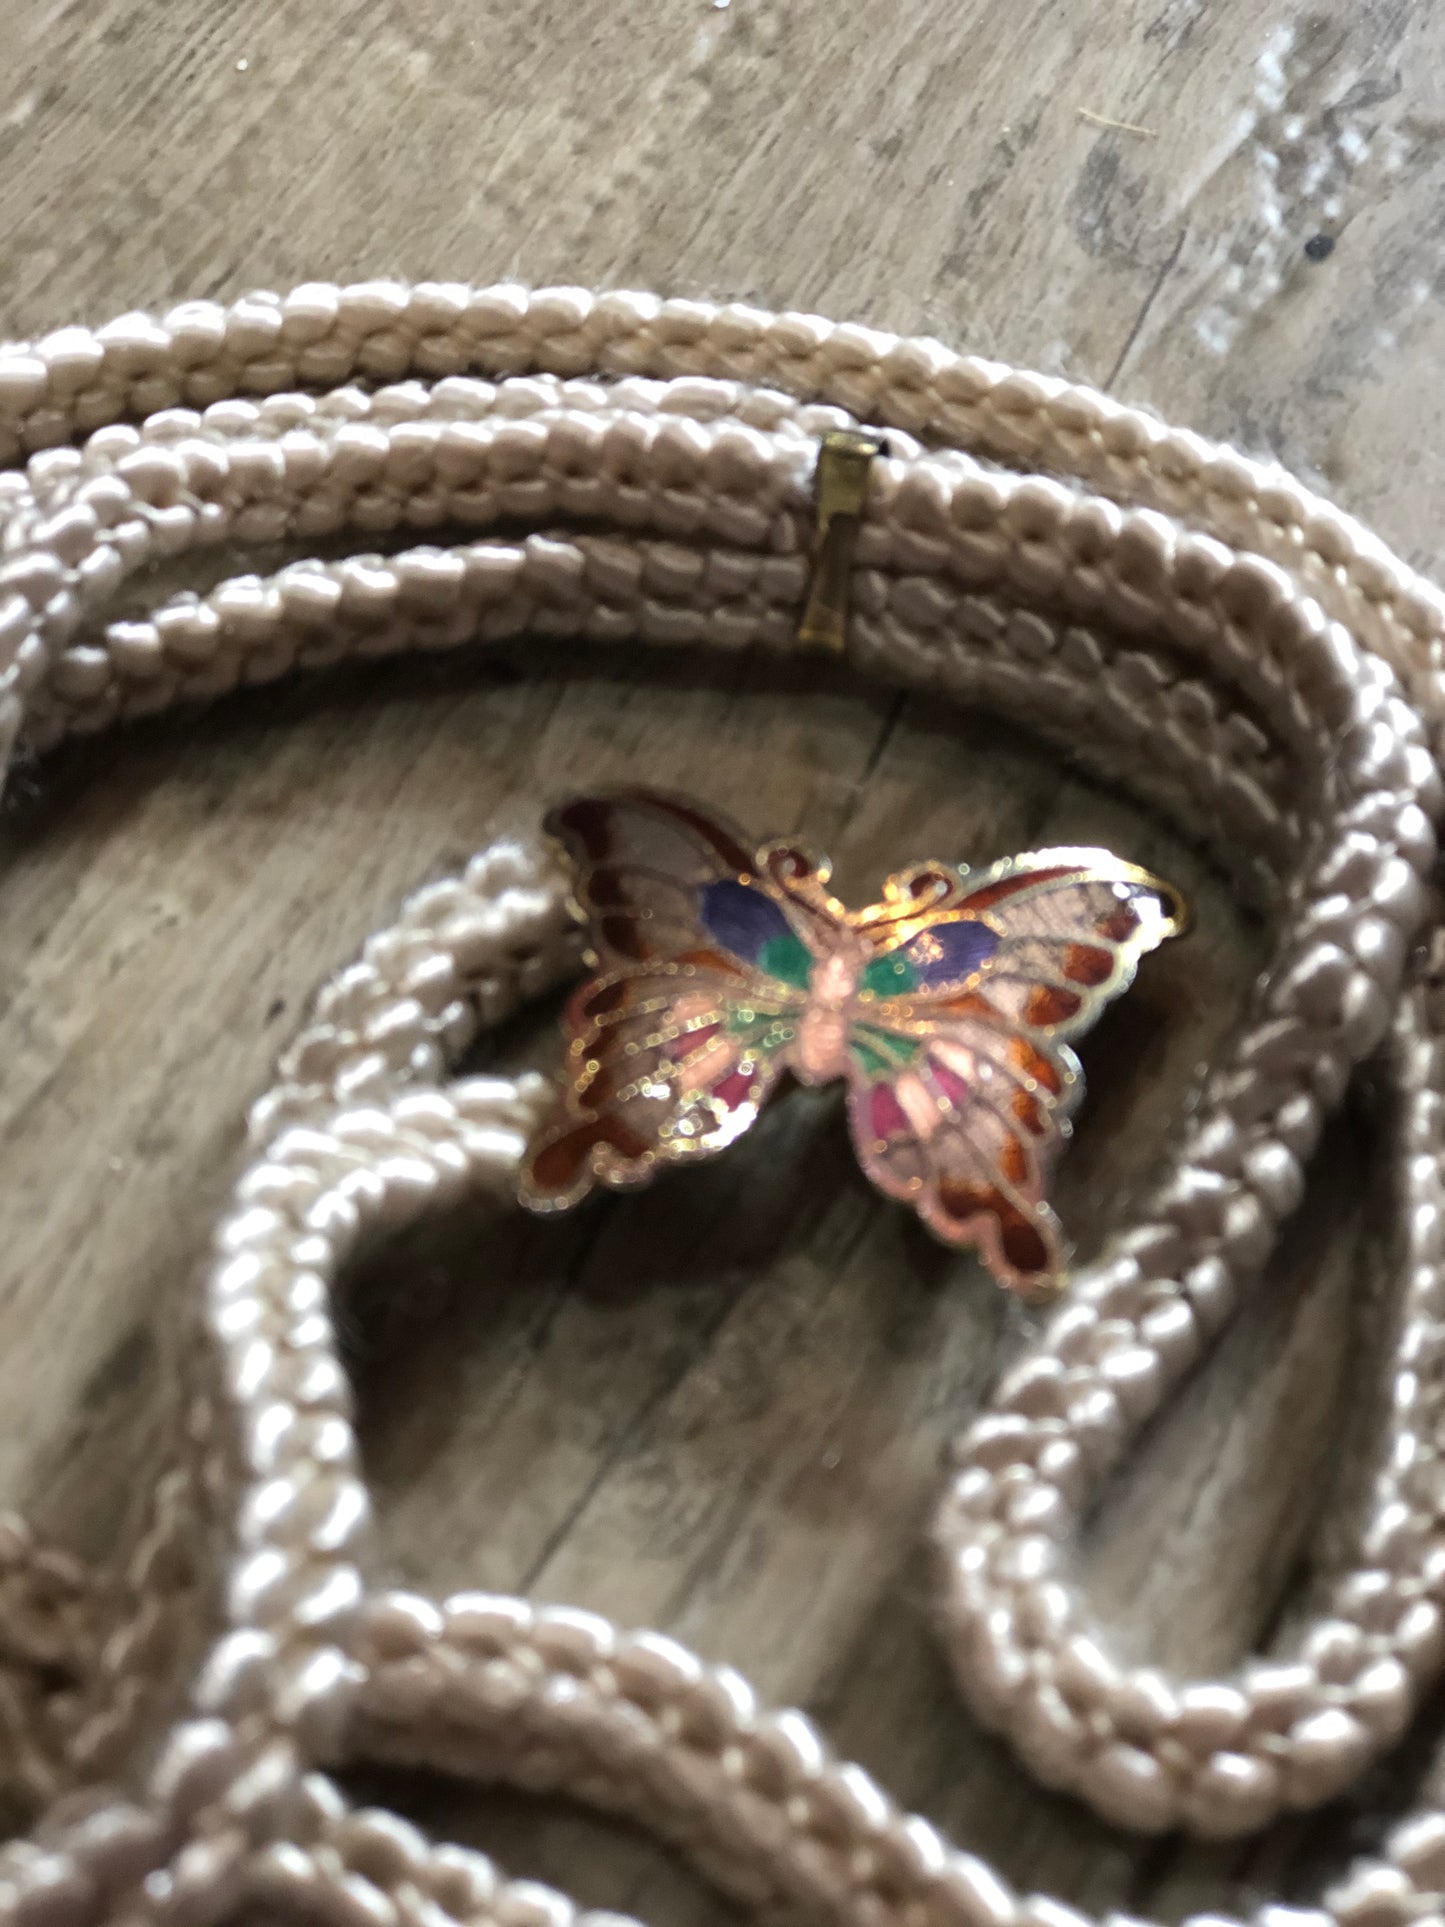 Vintage 80s Butterfly Rope Style Belt - Spark Pretty